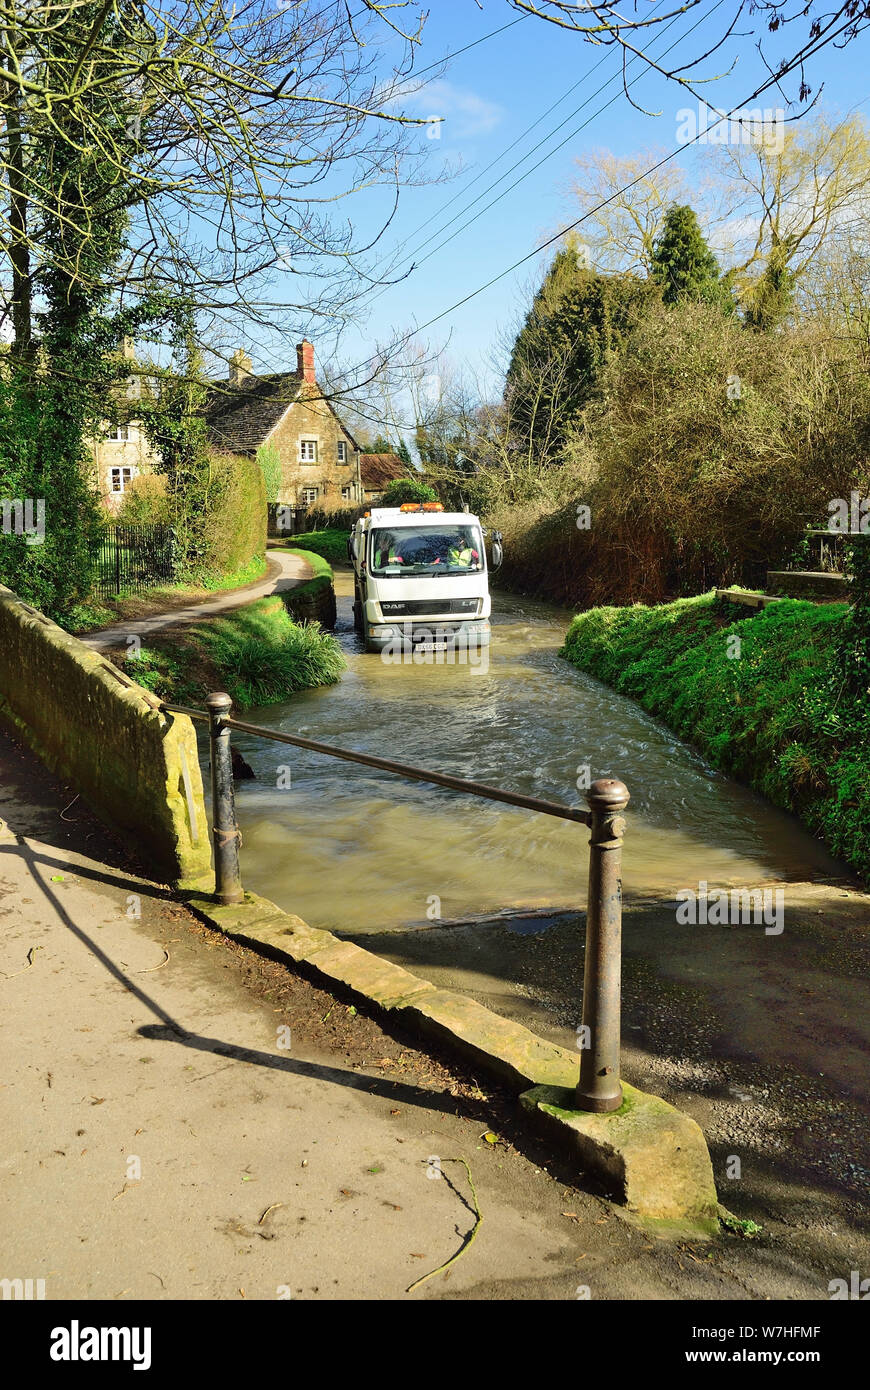 Refuse collection vehicle negotiating Bide Brook ford in Lacock, Wiltshire. Stock Photo